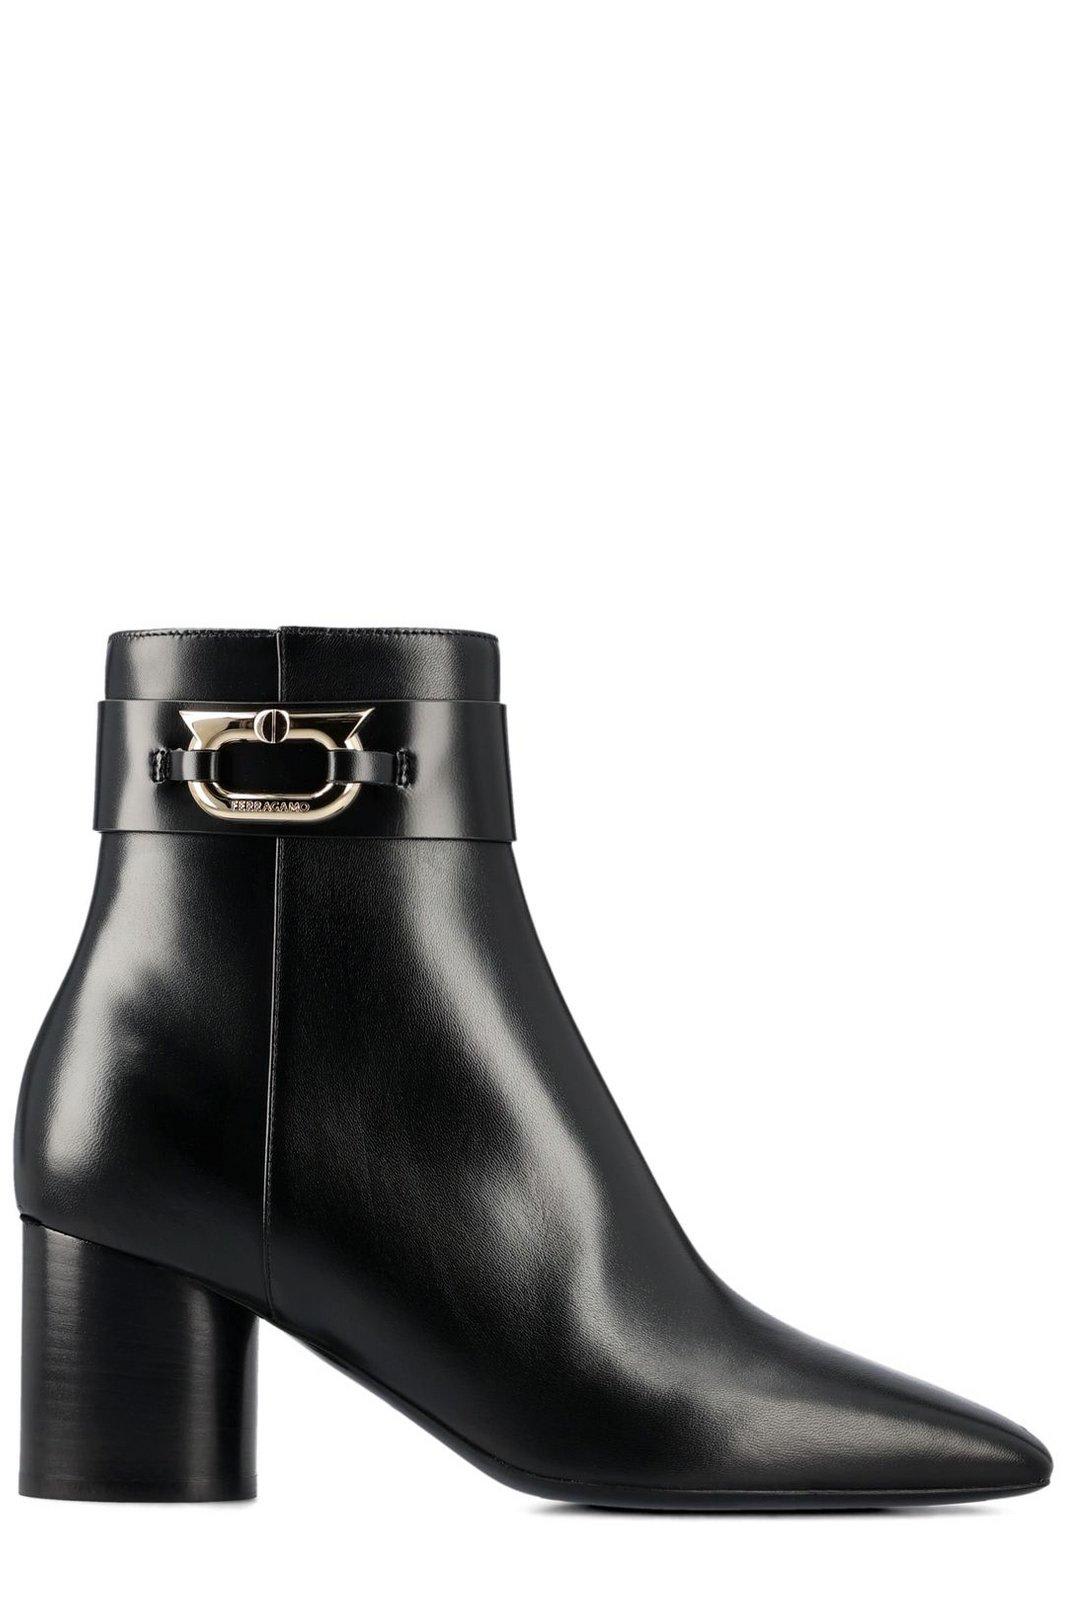 Ferragamo Pointed Toe Buckle Boots In Black